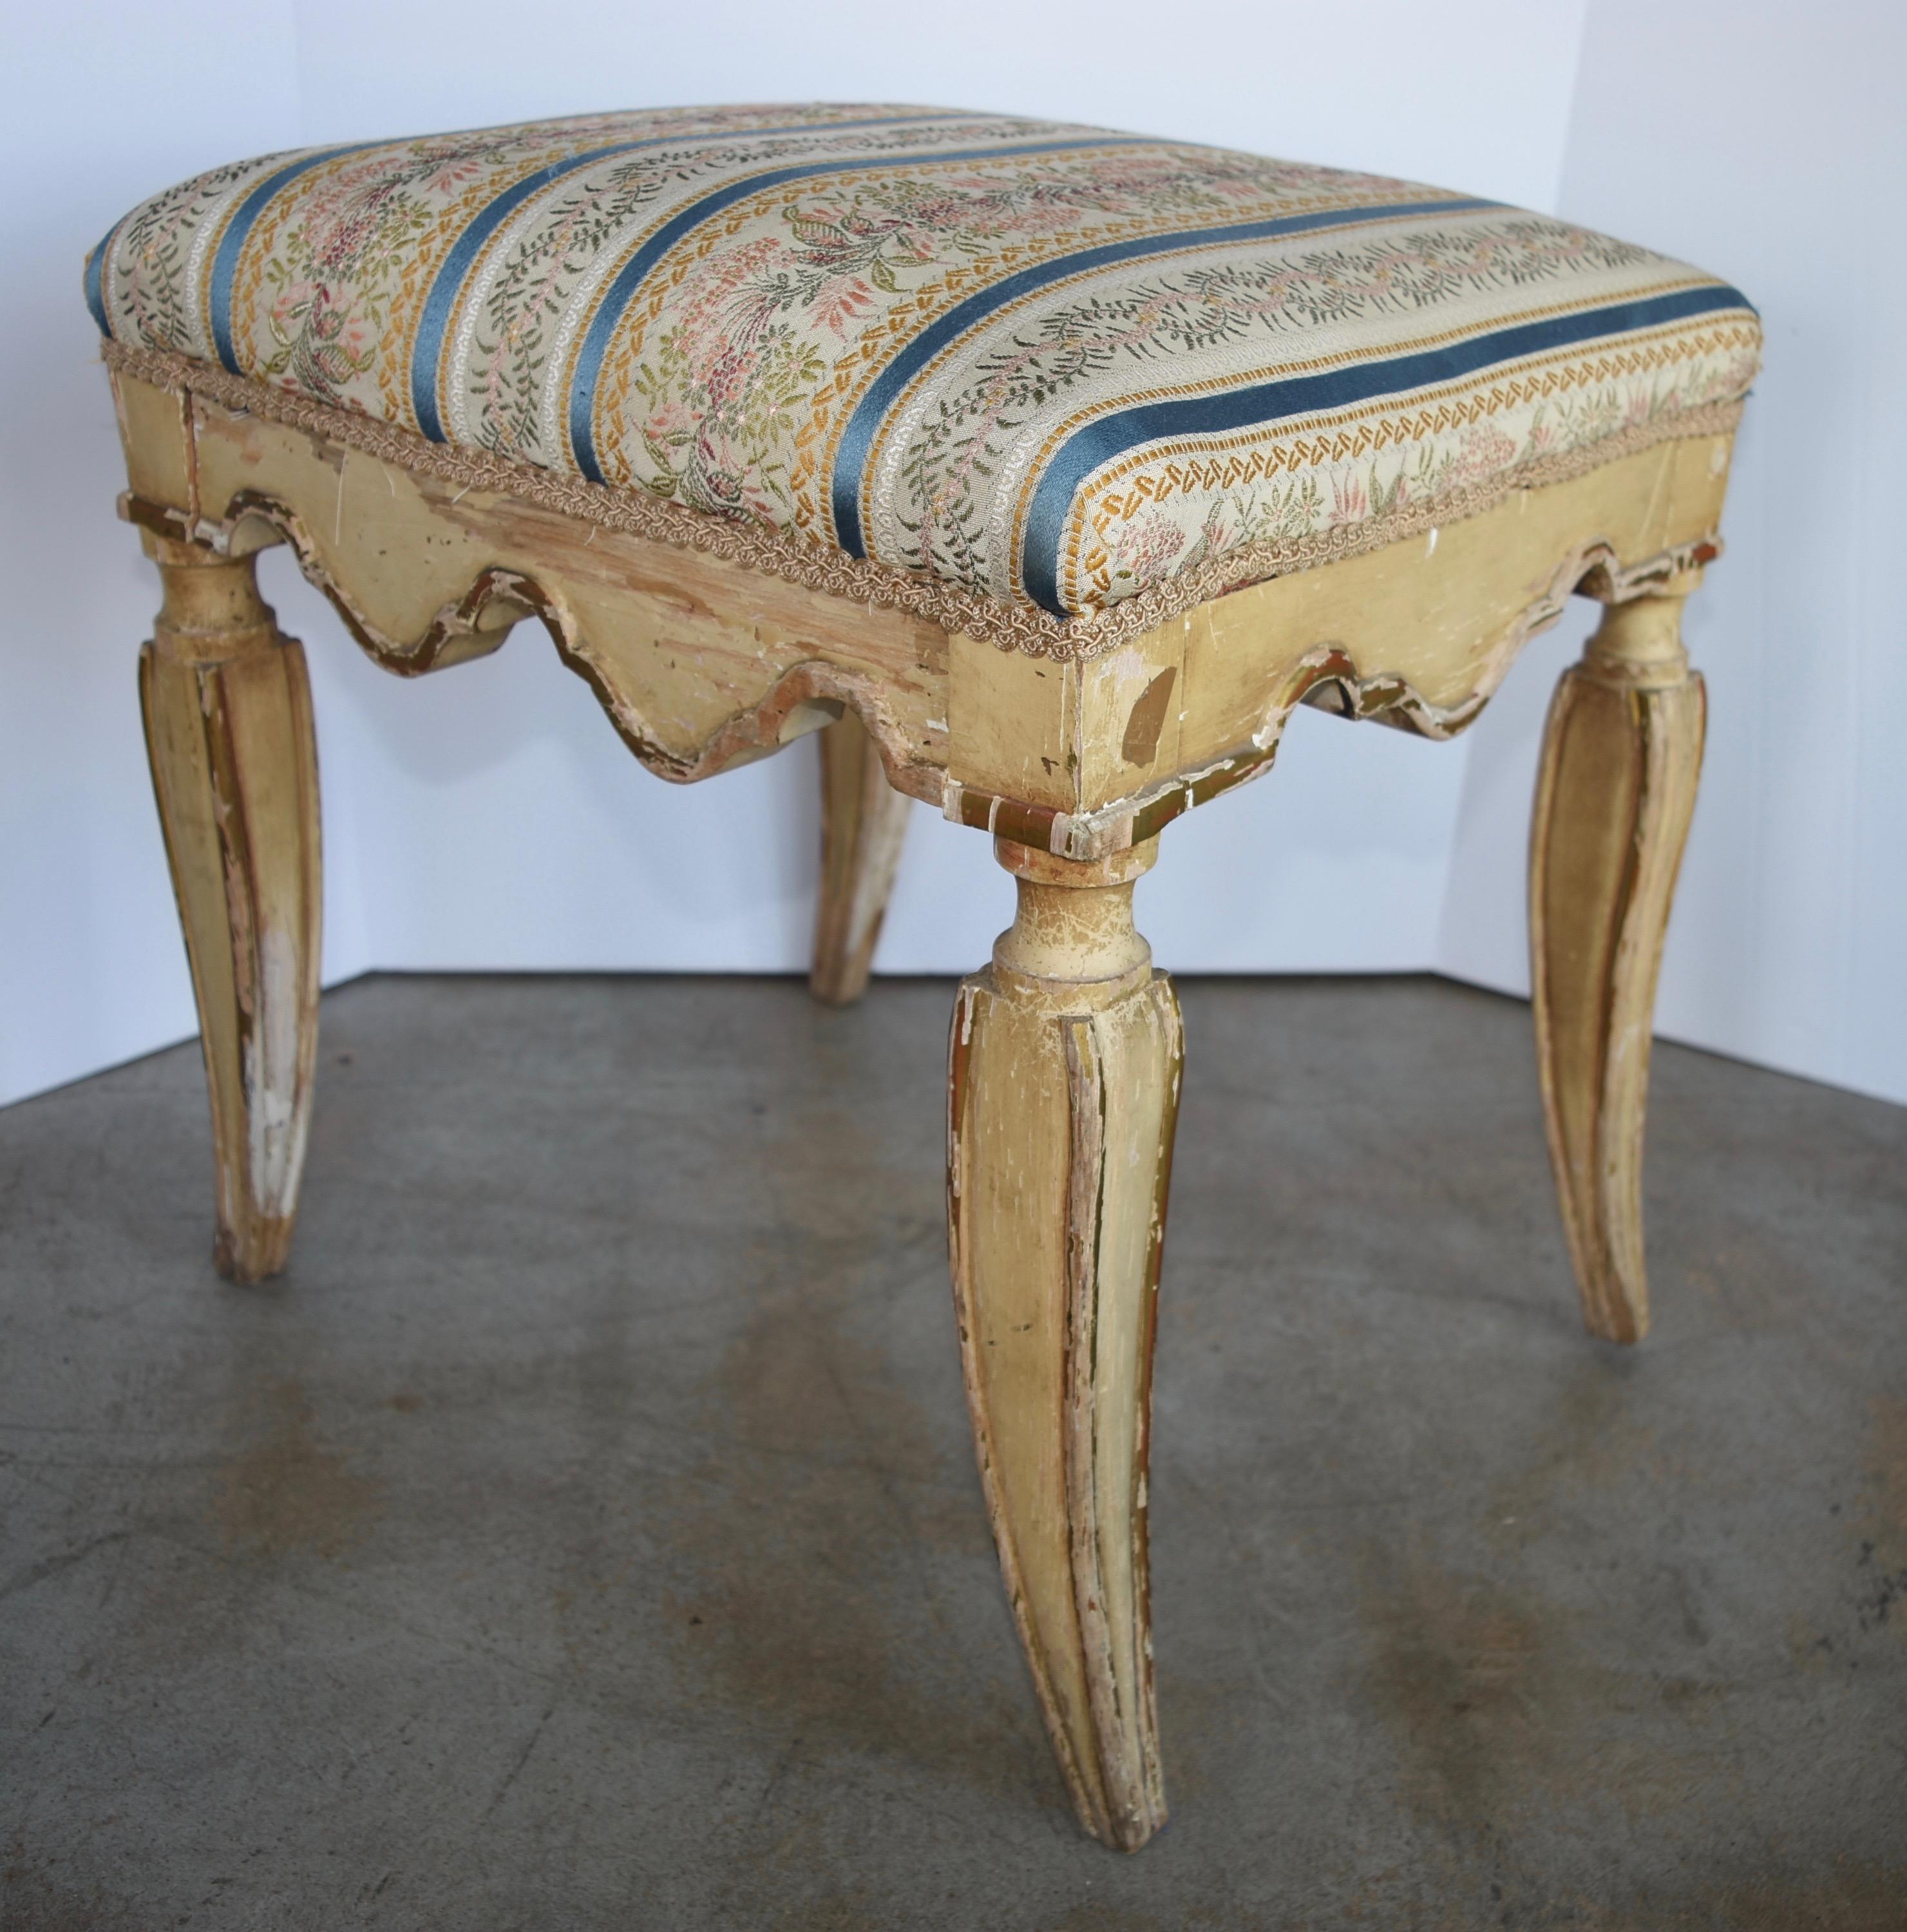 Very sweet pair of Italian benches, with beautiful gold leaf finish. These are the perfect size just about anywhere and are structurally sound. They have been newly upholstered in muslin.